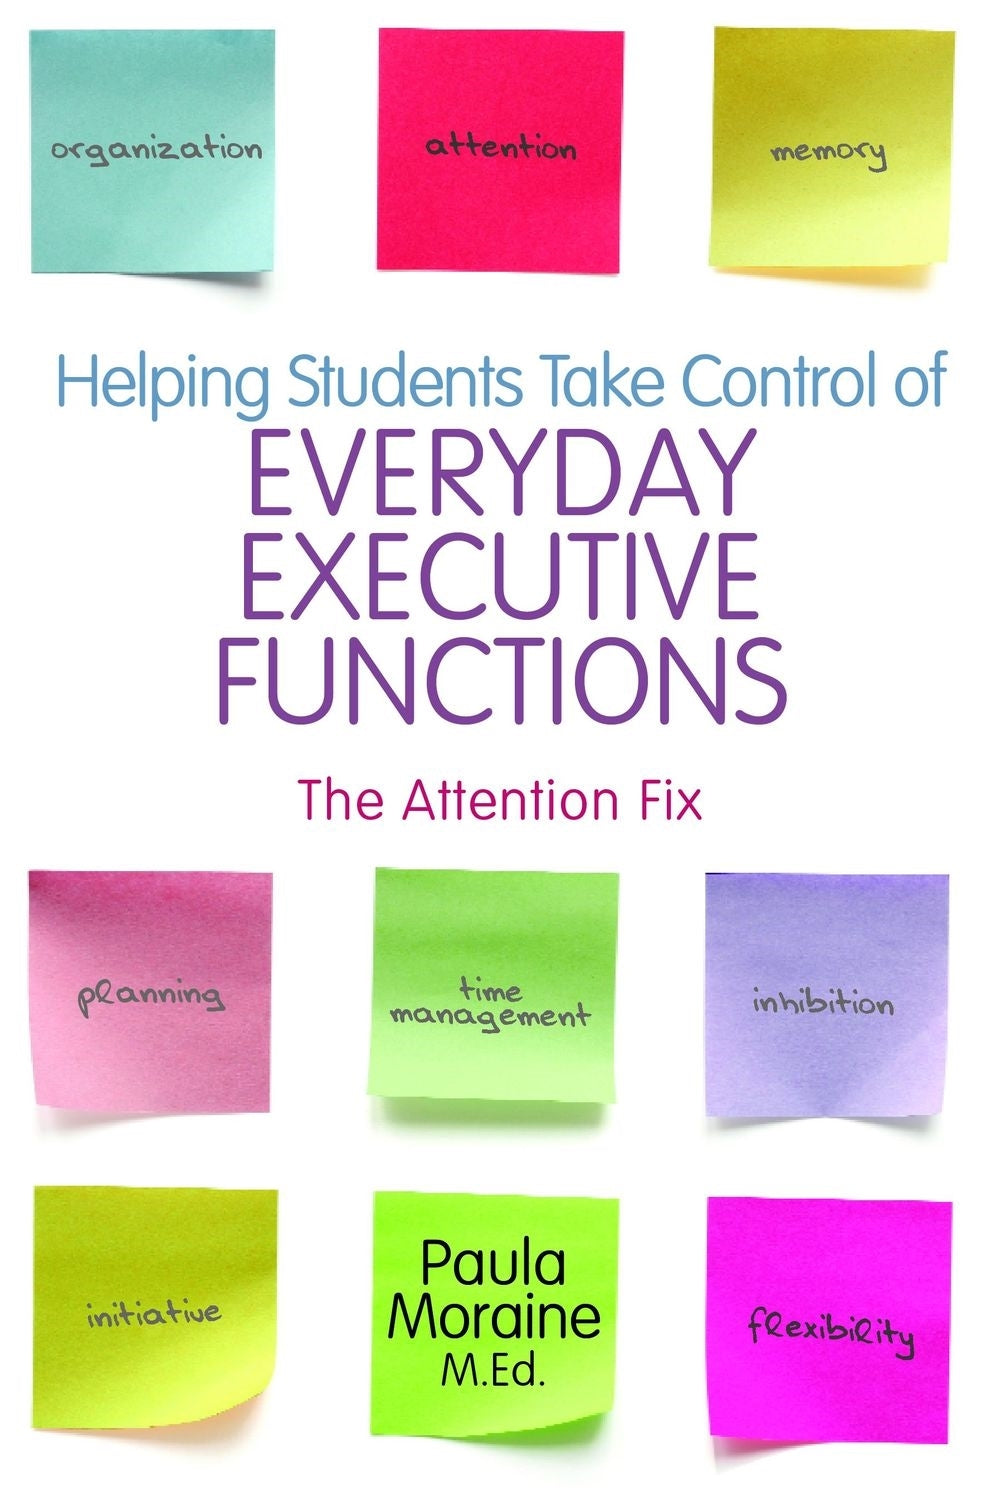 Helping Students Take Control of Everyday Executive Functions by Paula Moraine